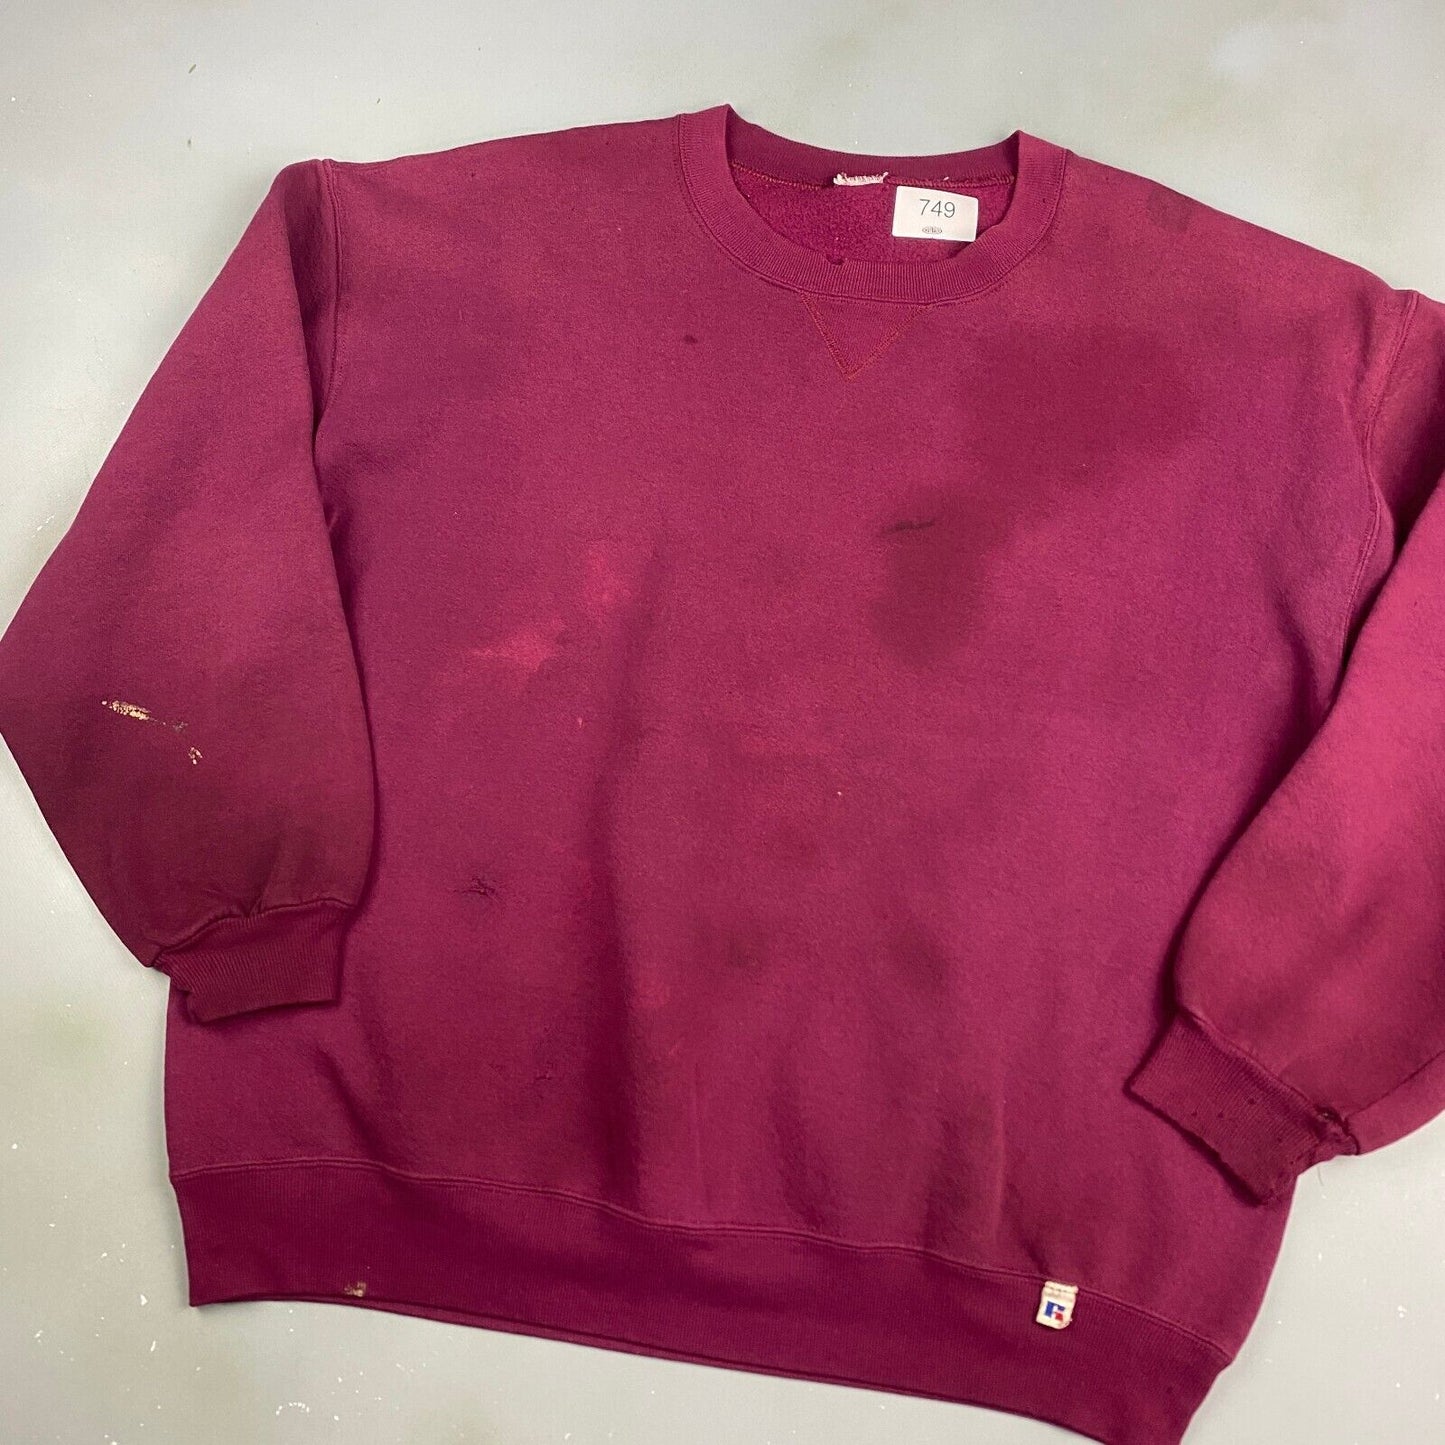 VINTAGE 90s Russell Athletic Faded Dark Red Crewneck Sweater sz XXL Adult Men